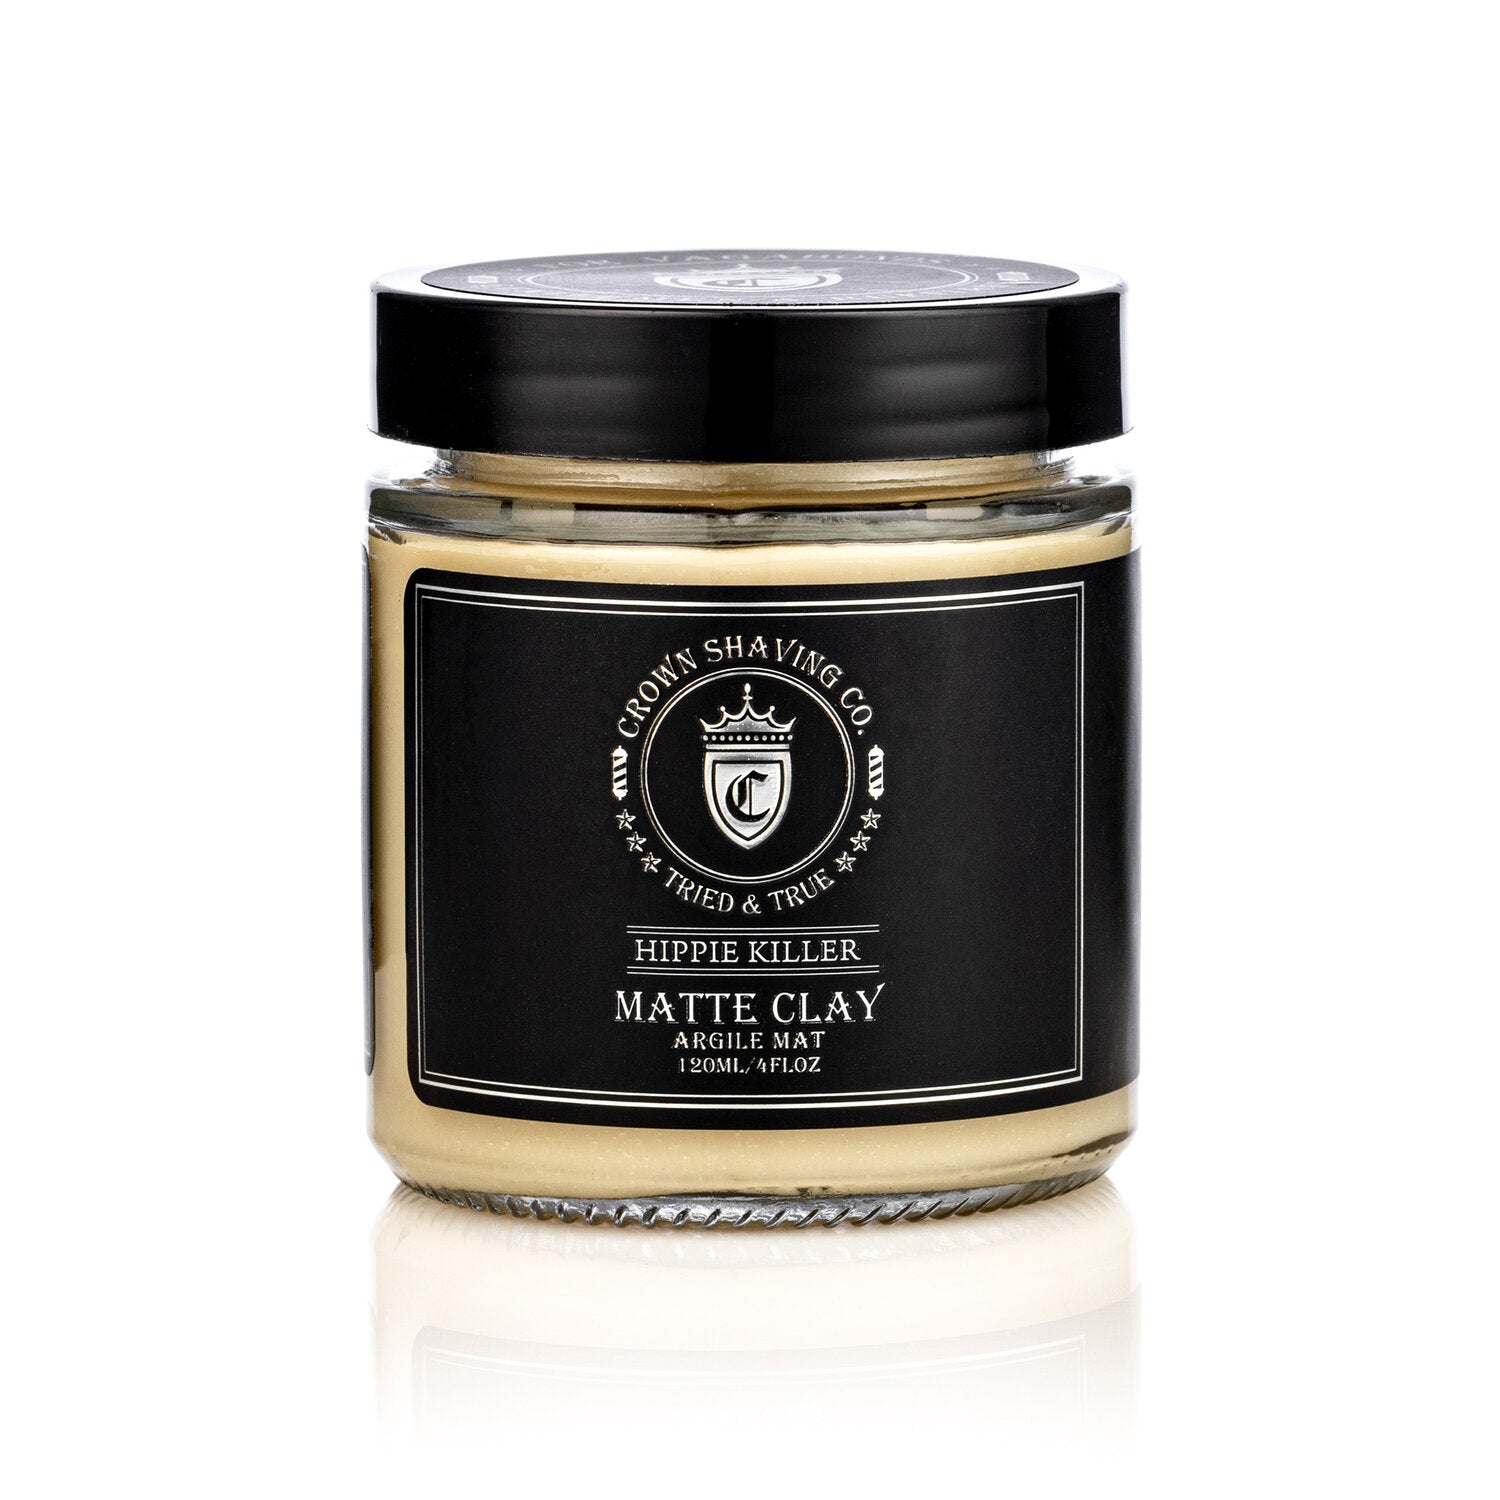 Crown Shaving co. Matte Styling Clay